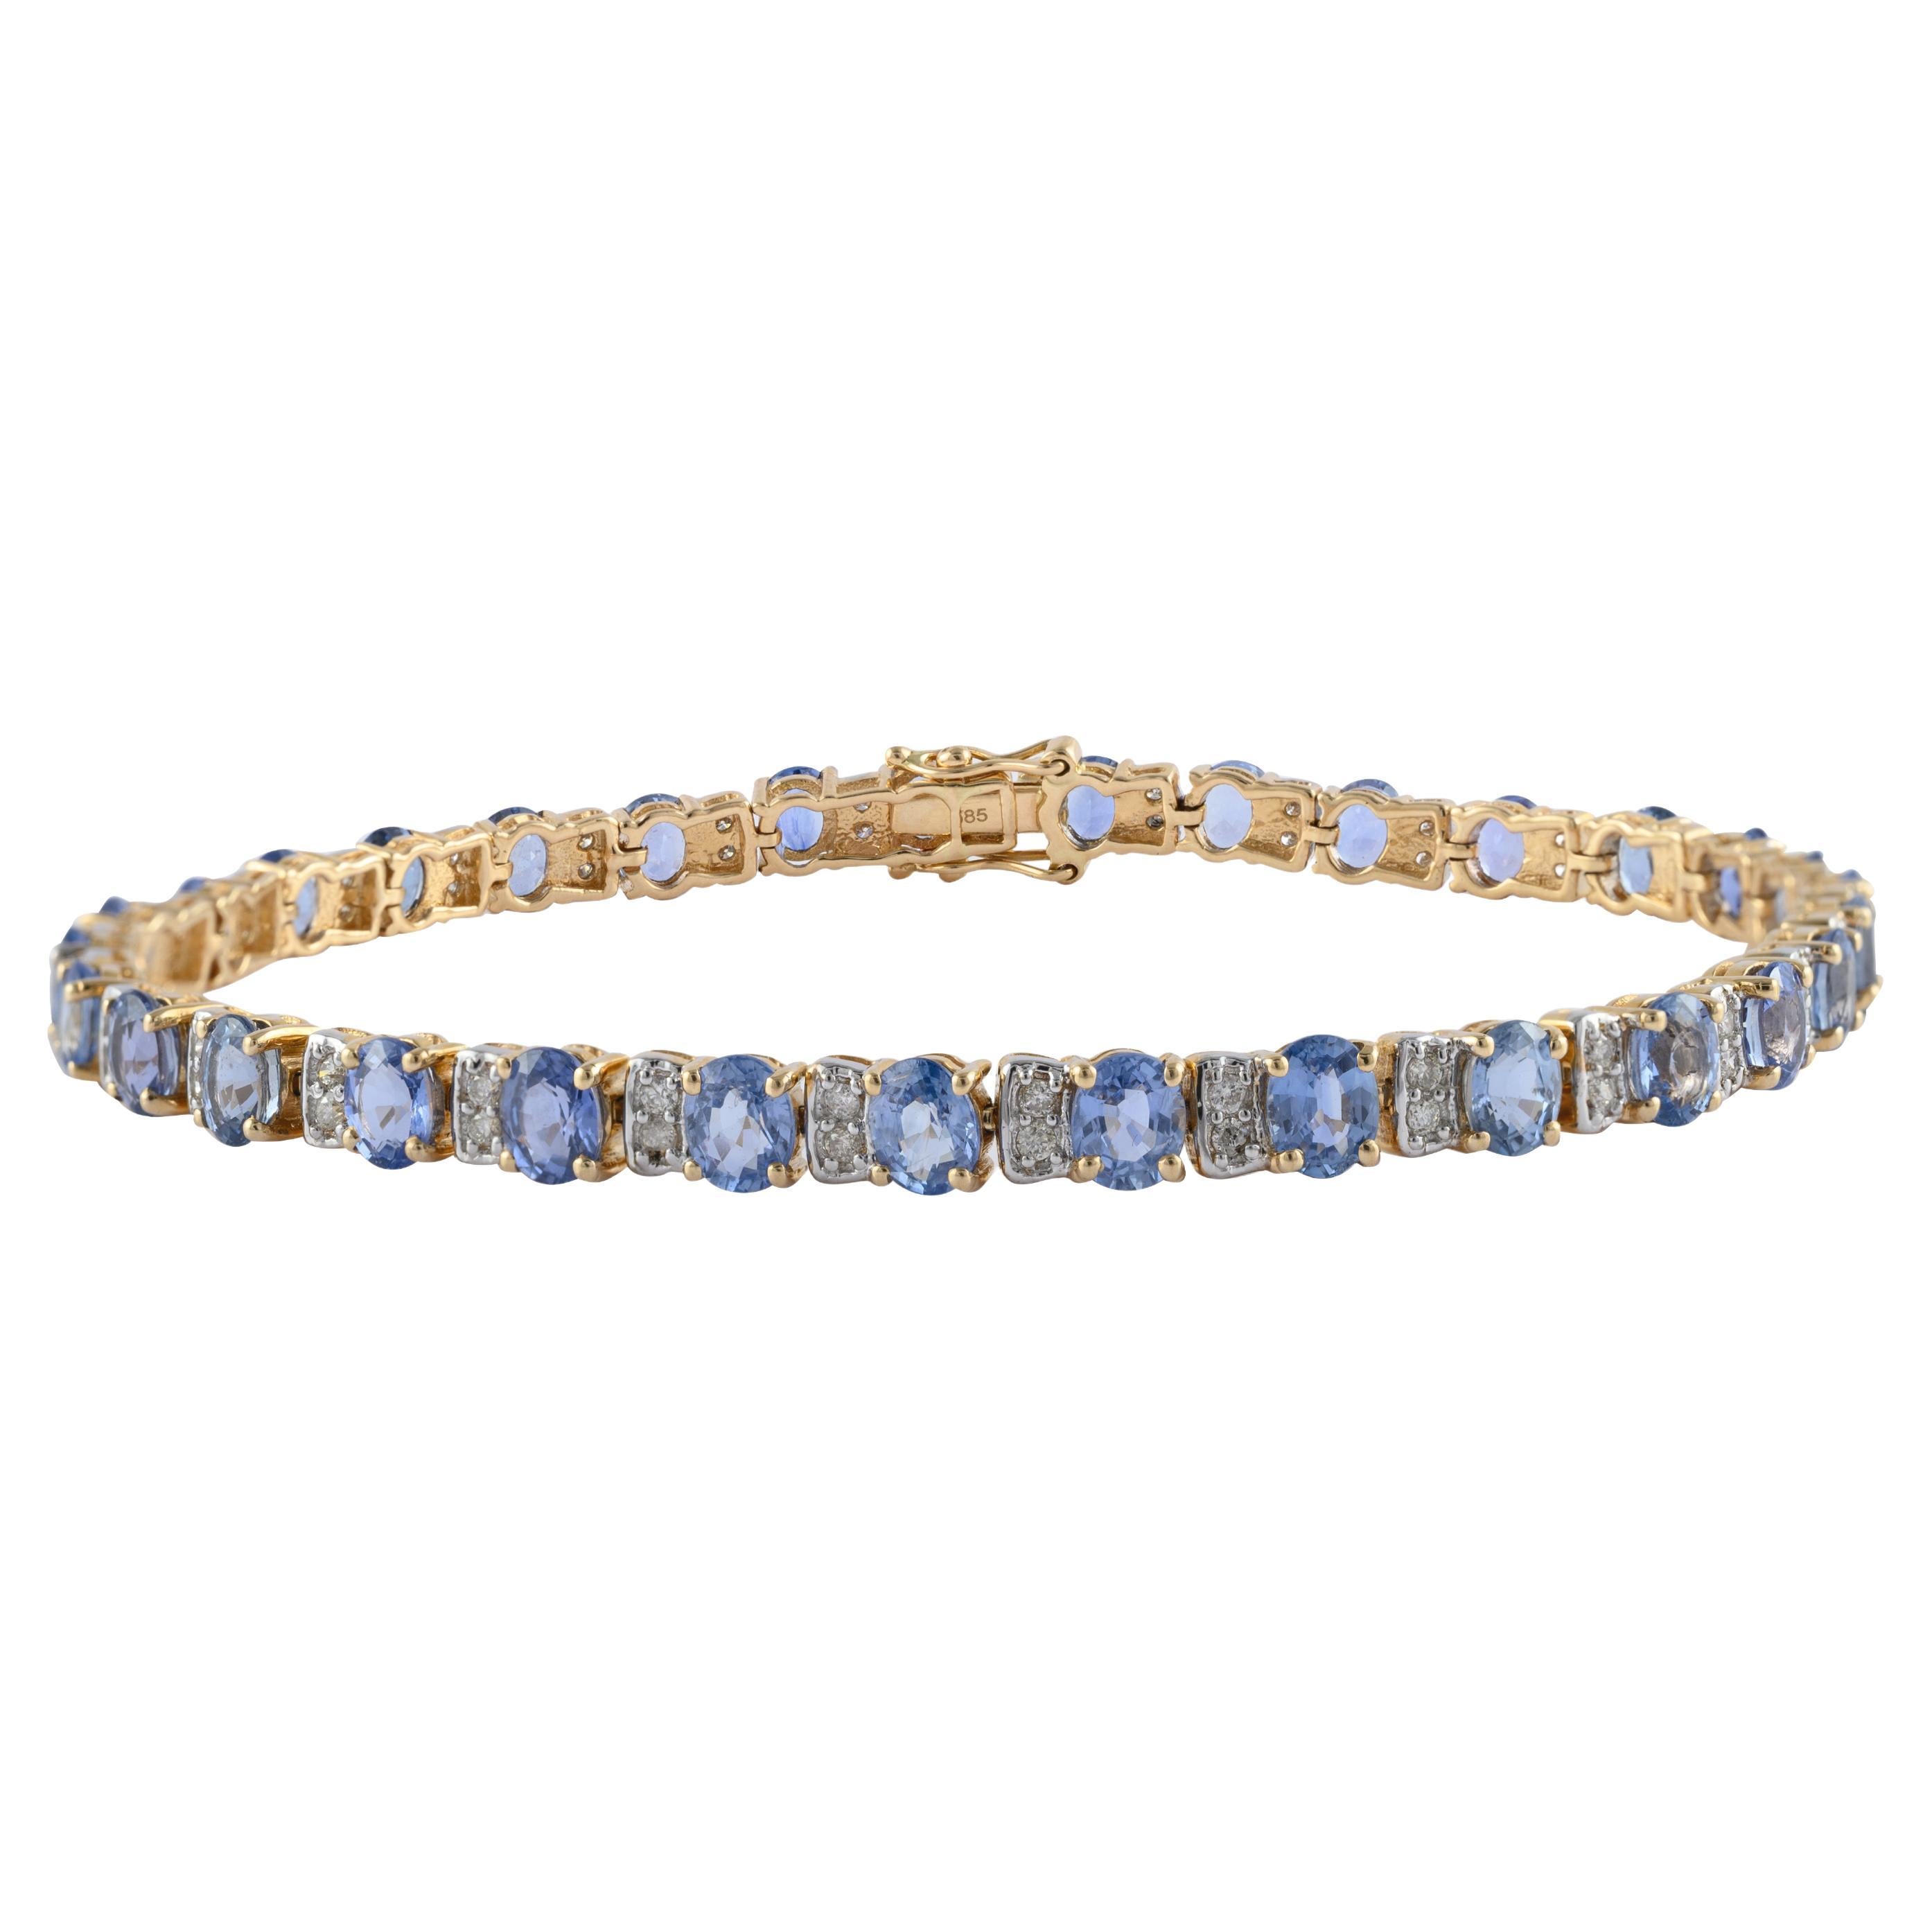 Tennis Bracelet with Blue Sapphire and Diamonds Set in Solid 14k Yellow Gold